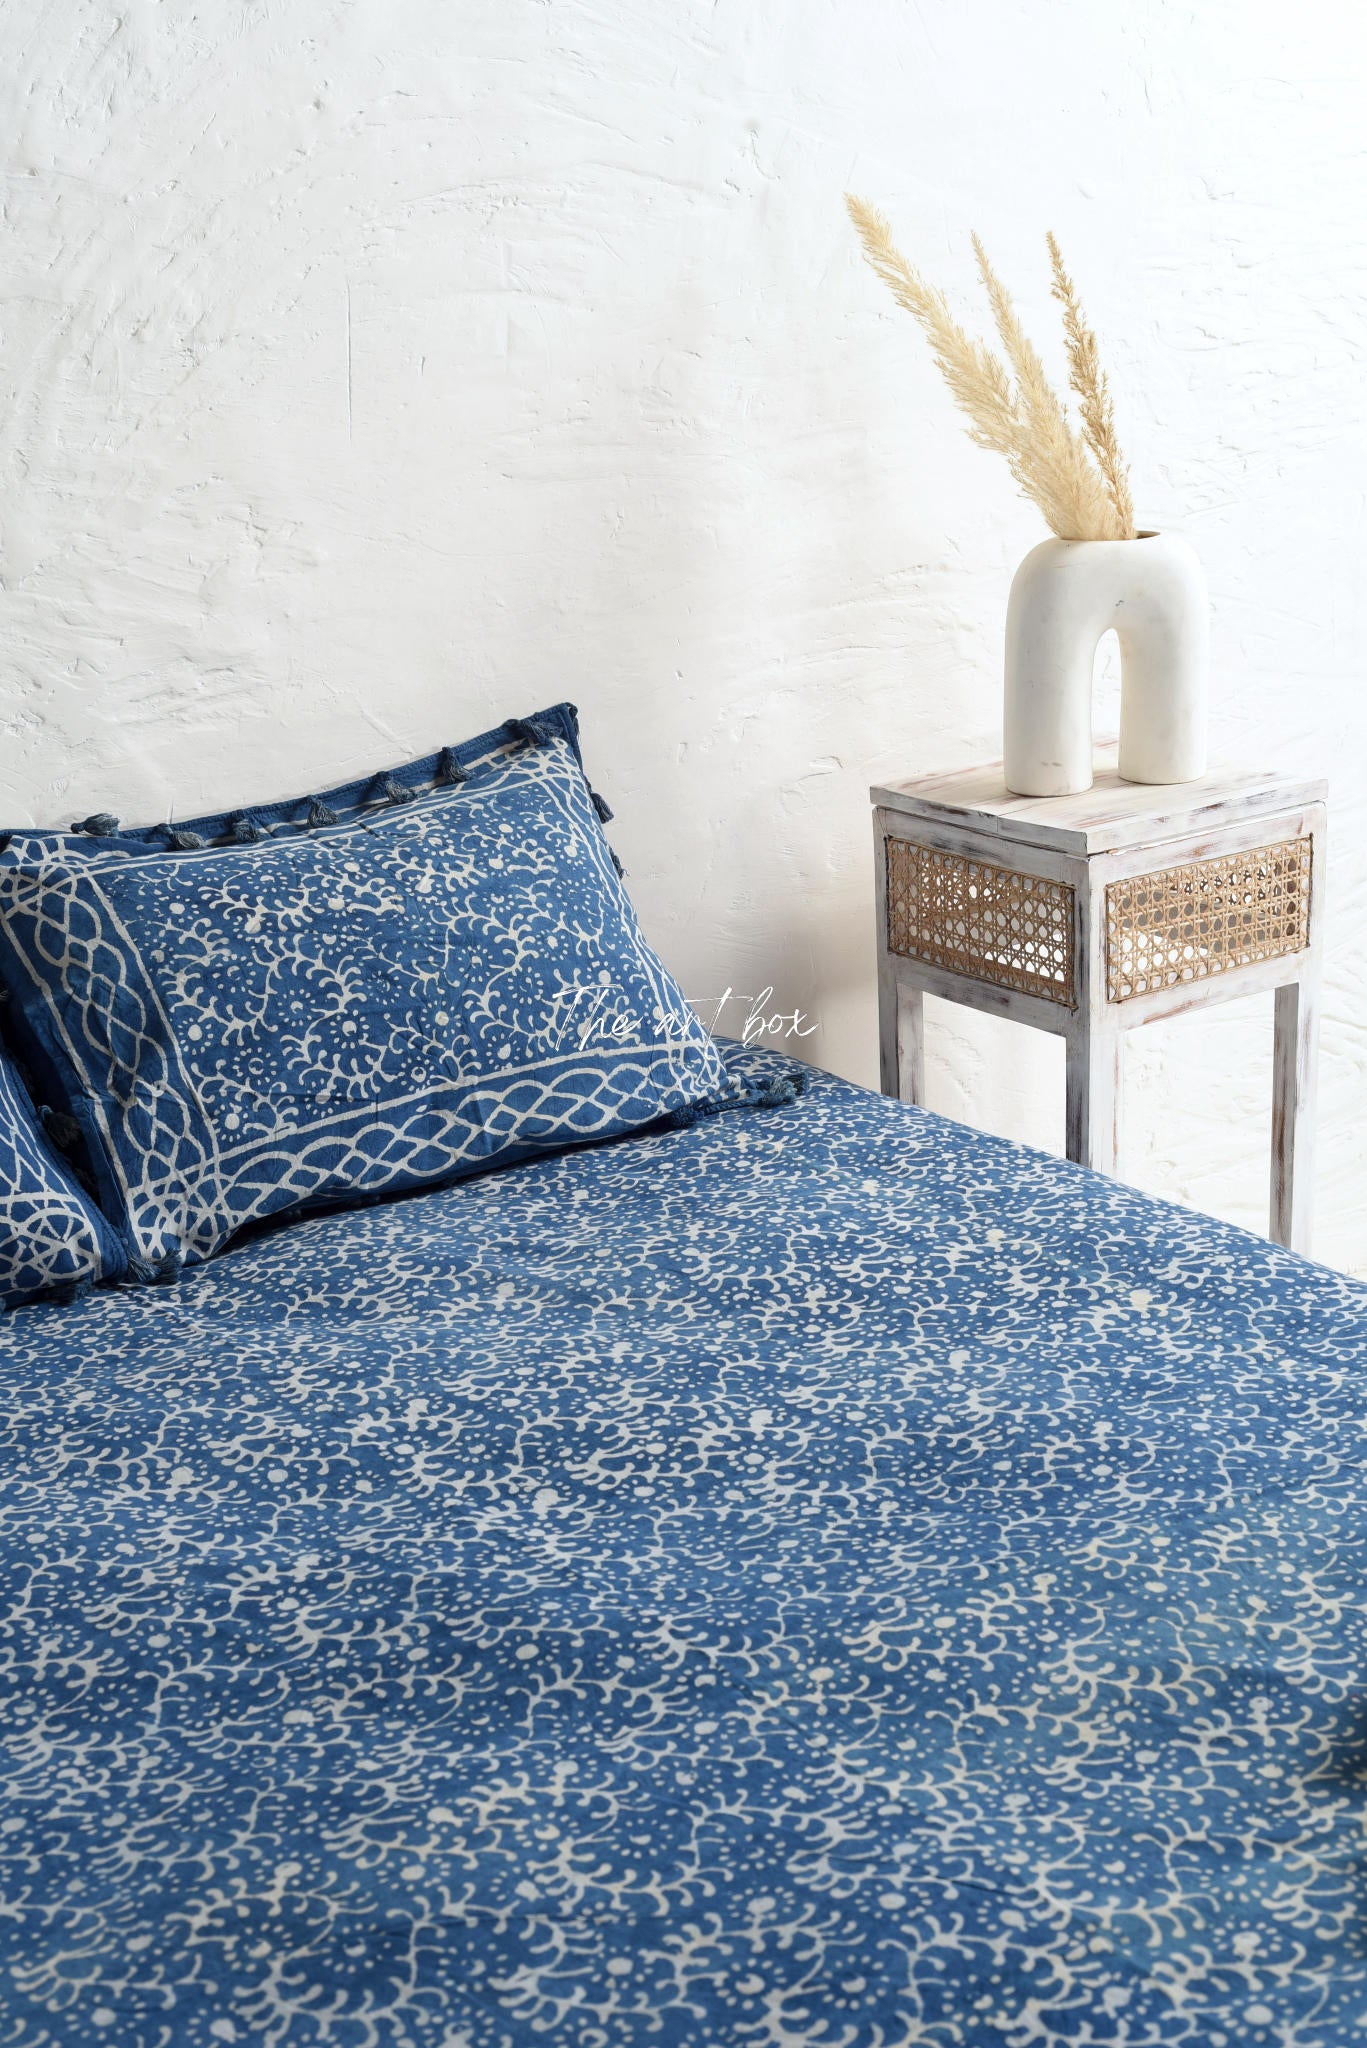 Ethnic Floral Block Printed Bedsheet and Pillow Set